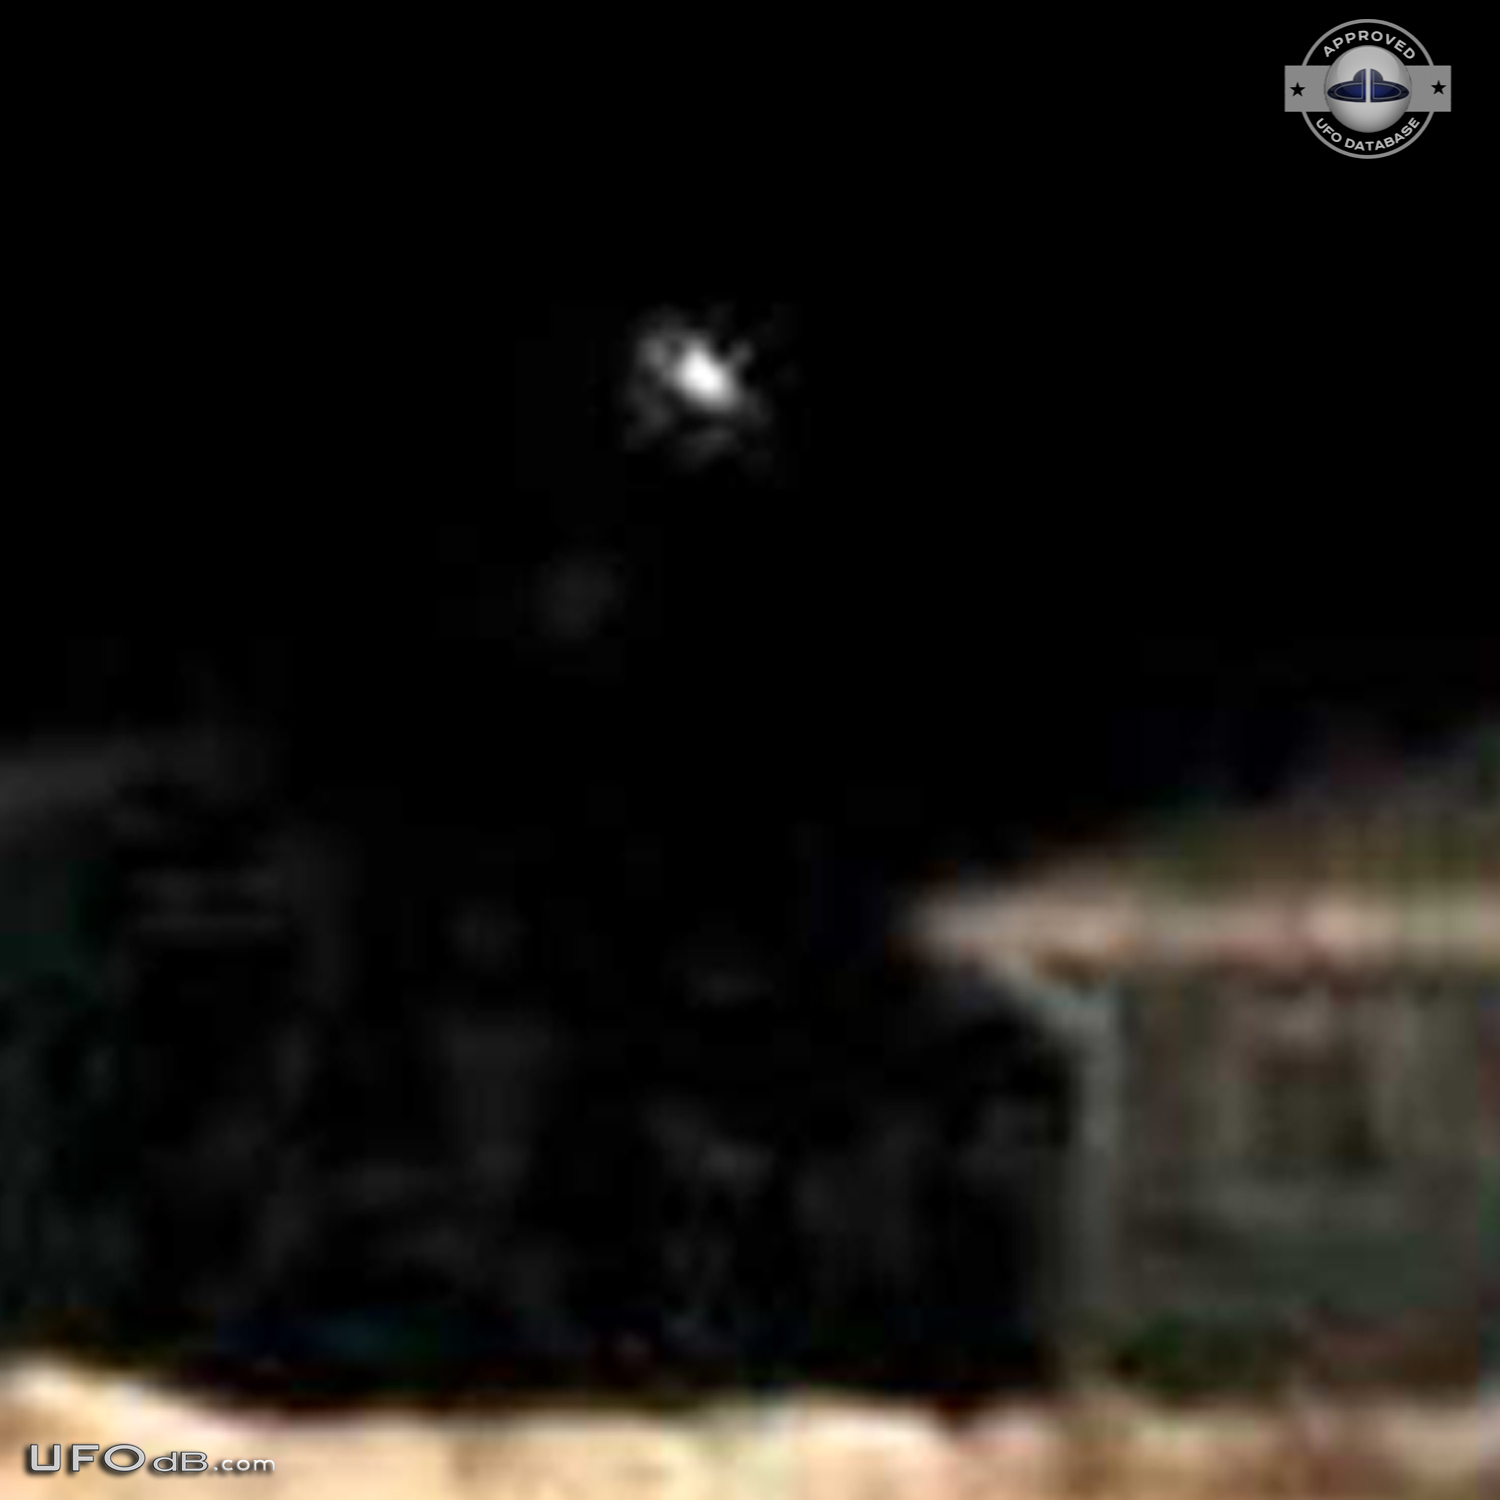 Much too low to be a star - UFO picture in Saskatchewan, Canada 2012 UFO Picture #403-4